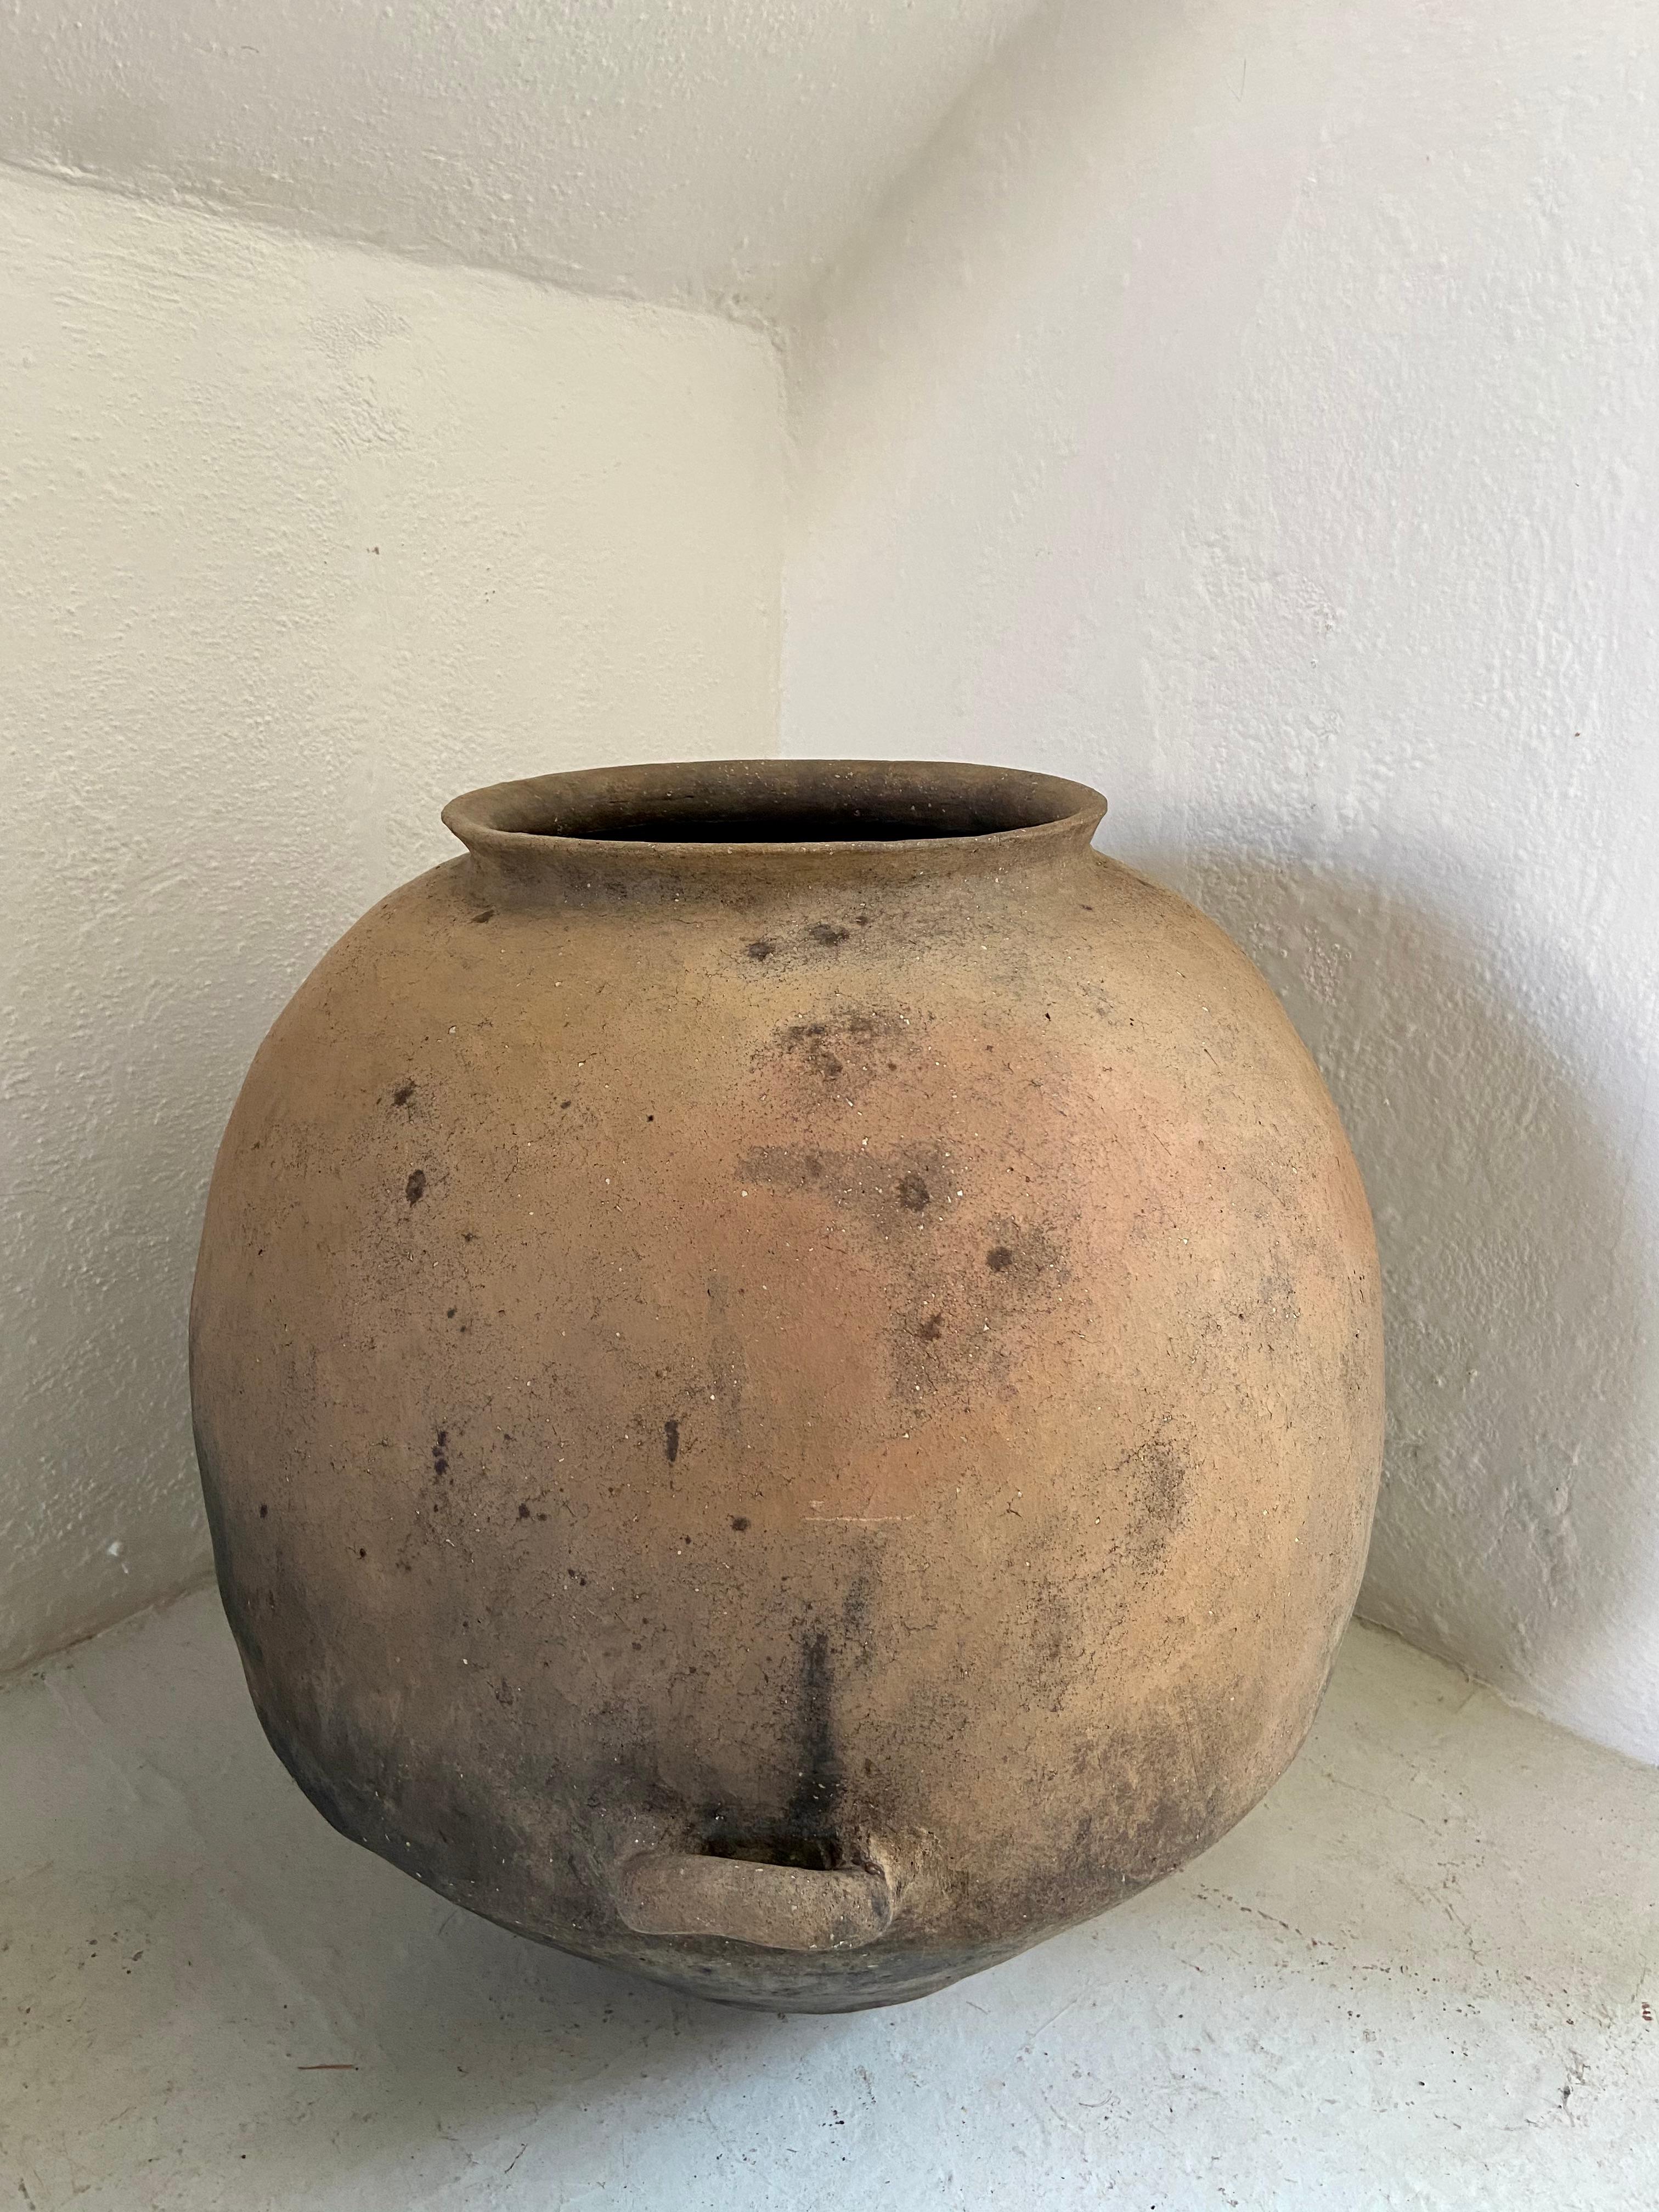 Rustic Terracotta Jar From Mexico, Circa Late 19th Century